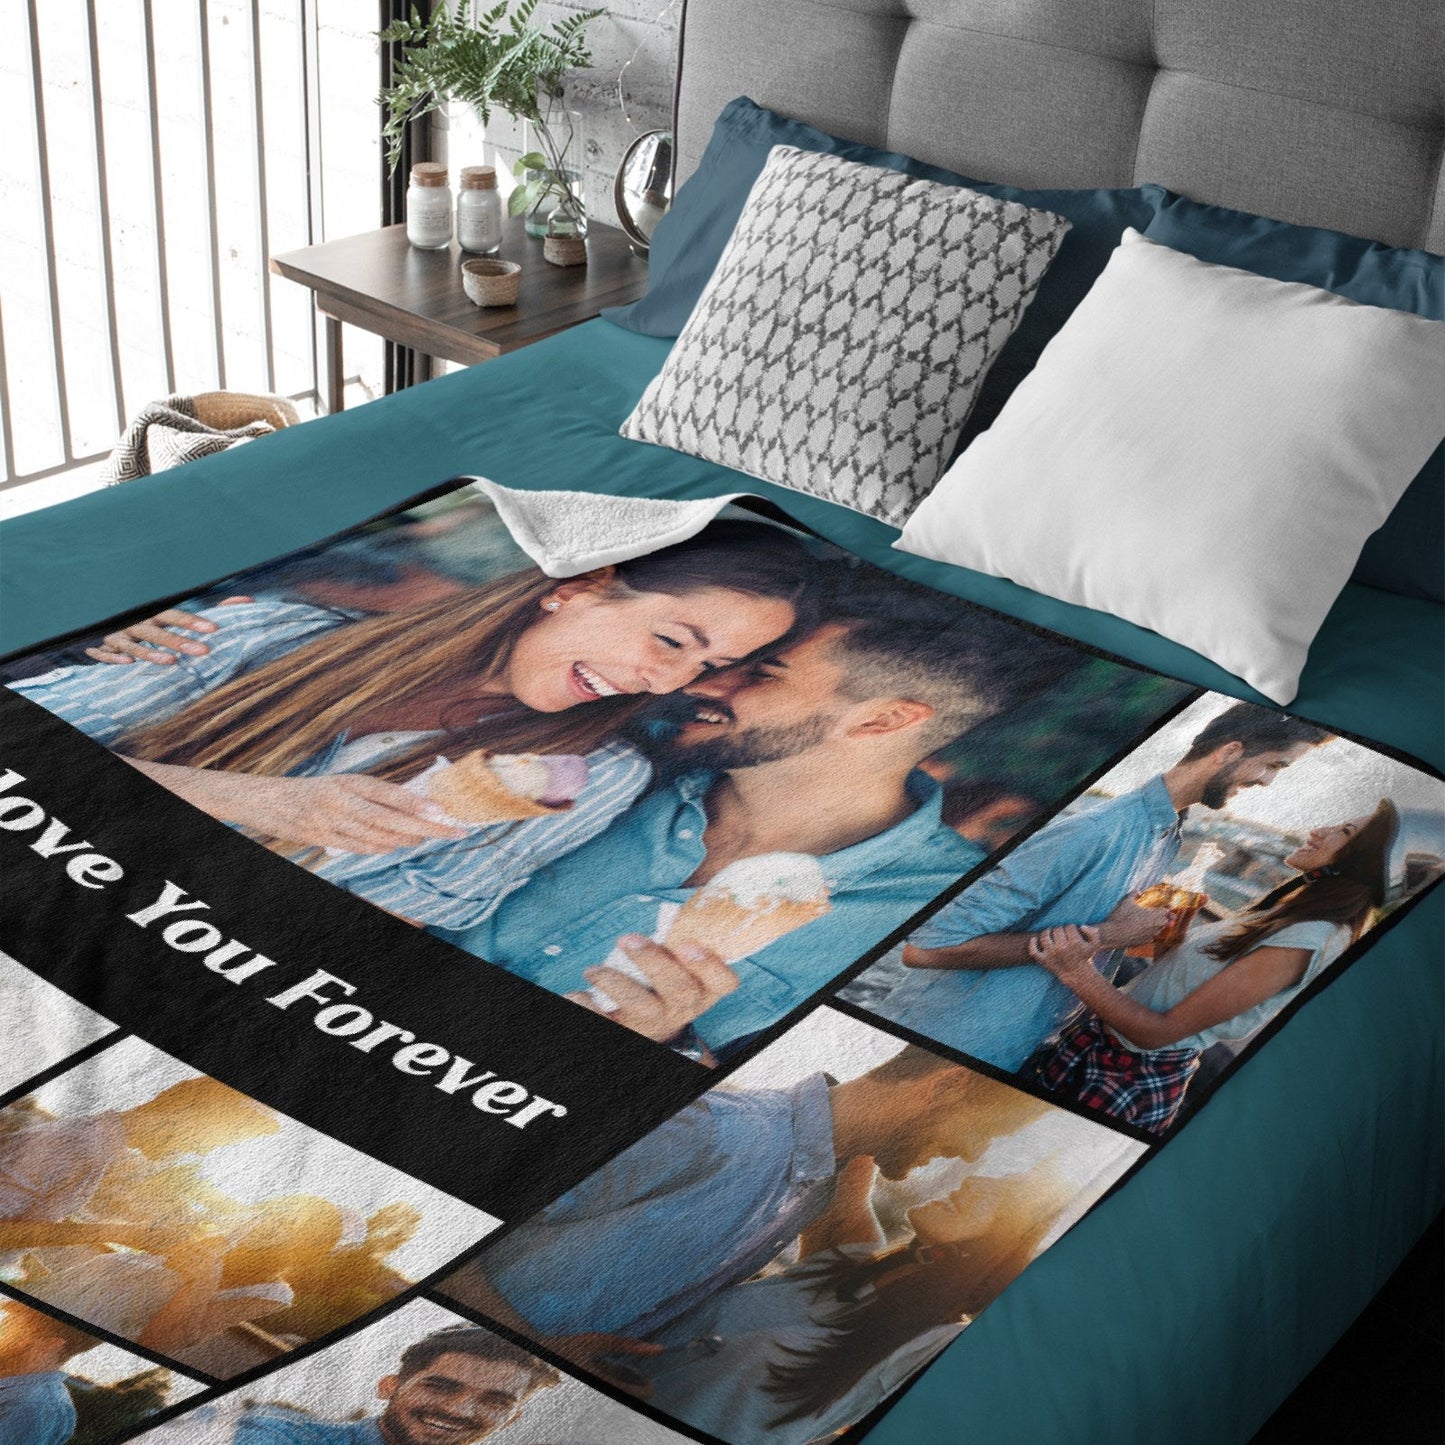 ️Personalized Photo Text Custom Blanket - For Family Parents Couple